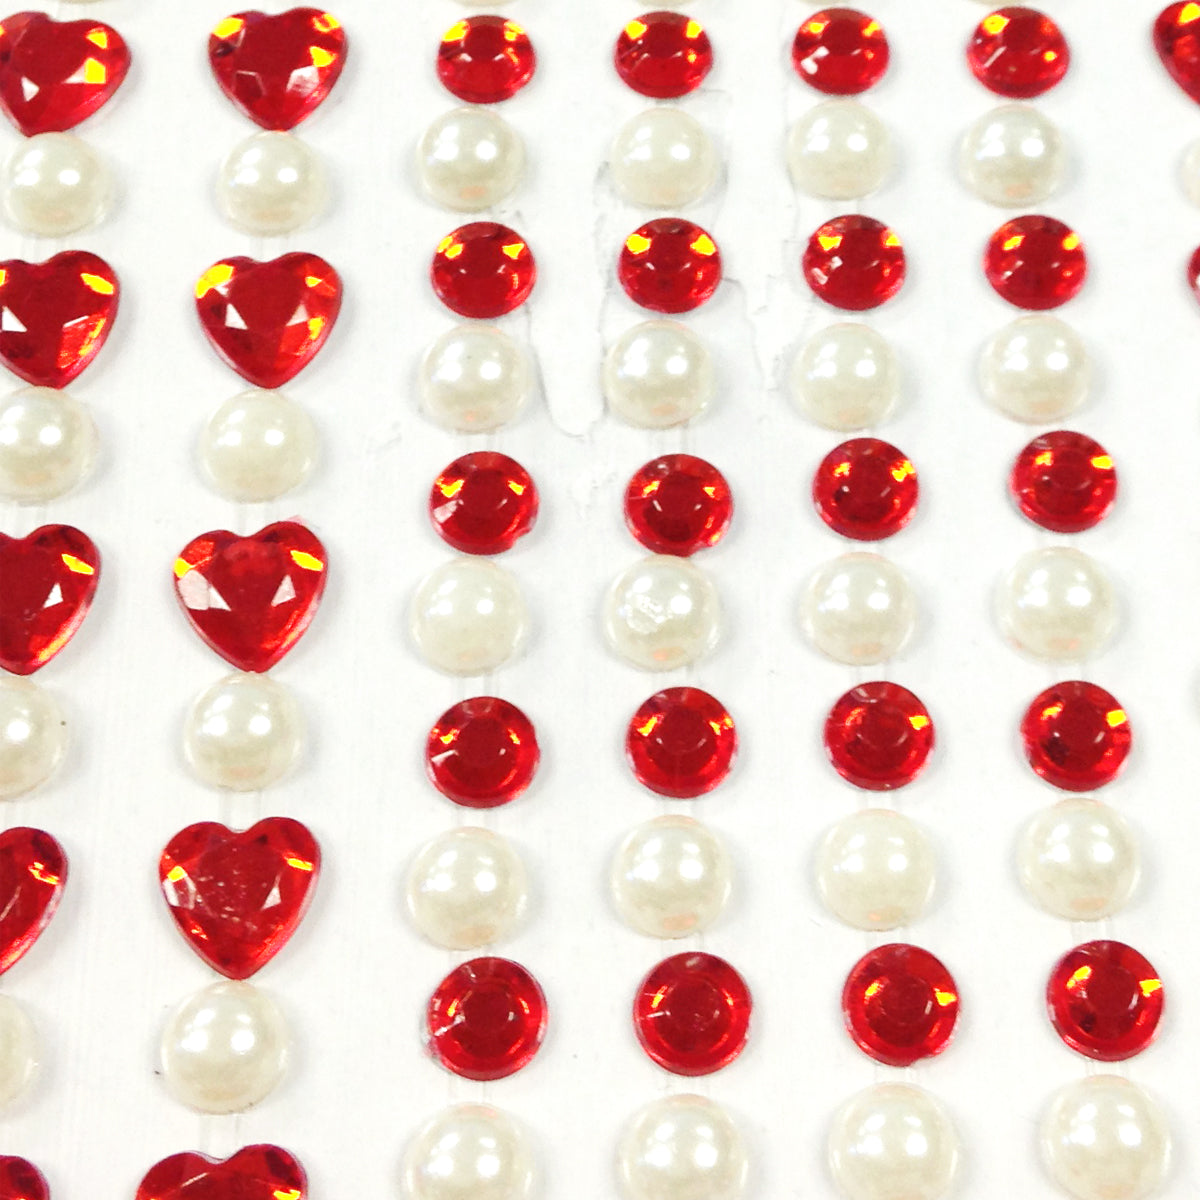 Wrapables 164 pieces Crystal Heart and Pearl Stickers Adhesive Rhinestones